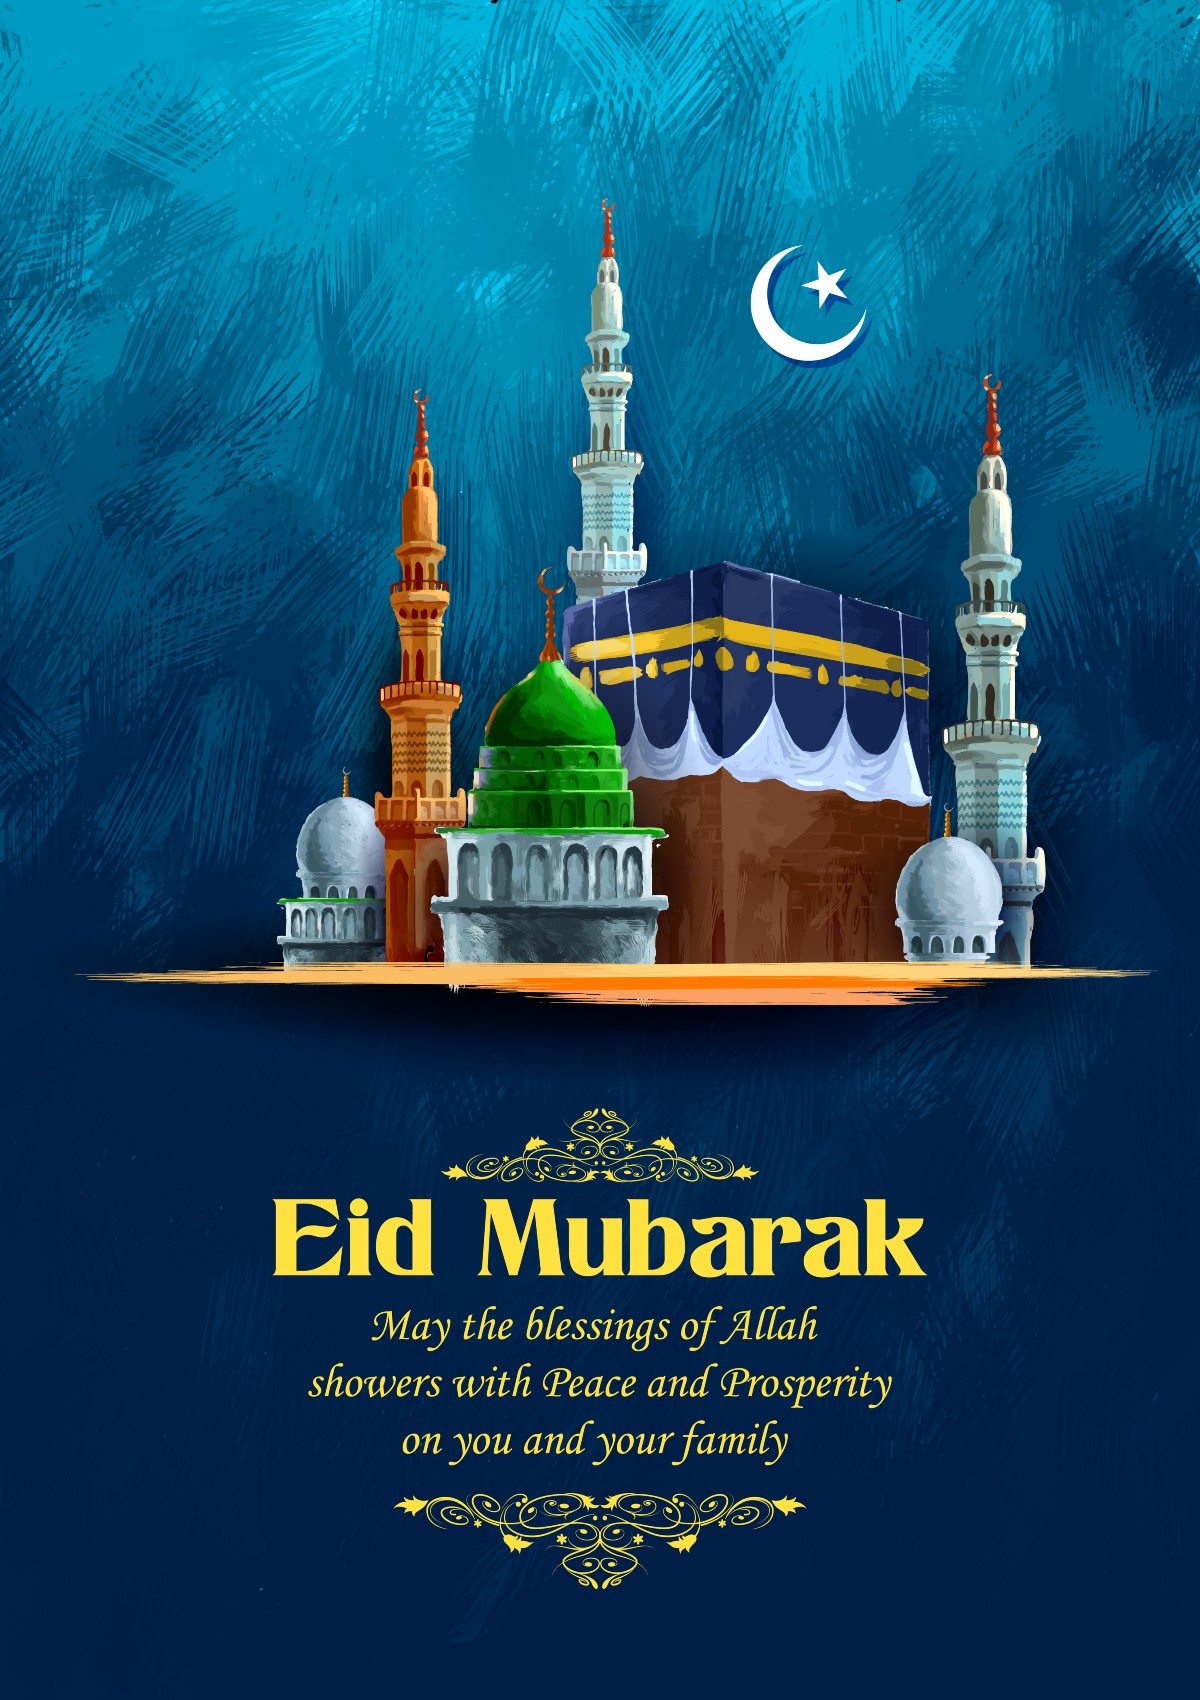 Best Eid Mubarak Wishes, Messages, Shayari, and Images to Share on Eid